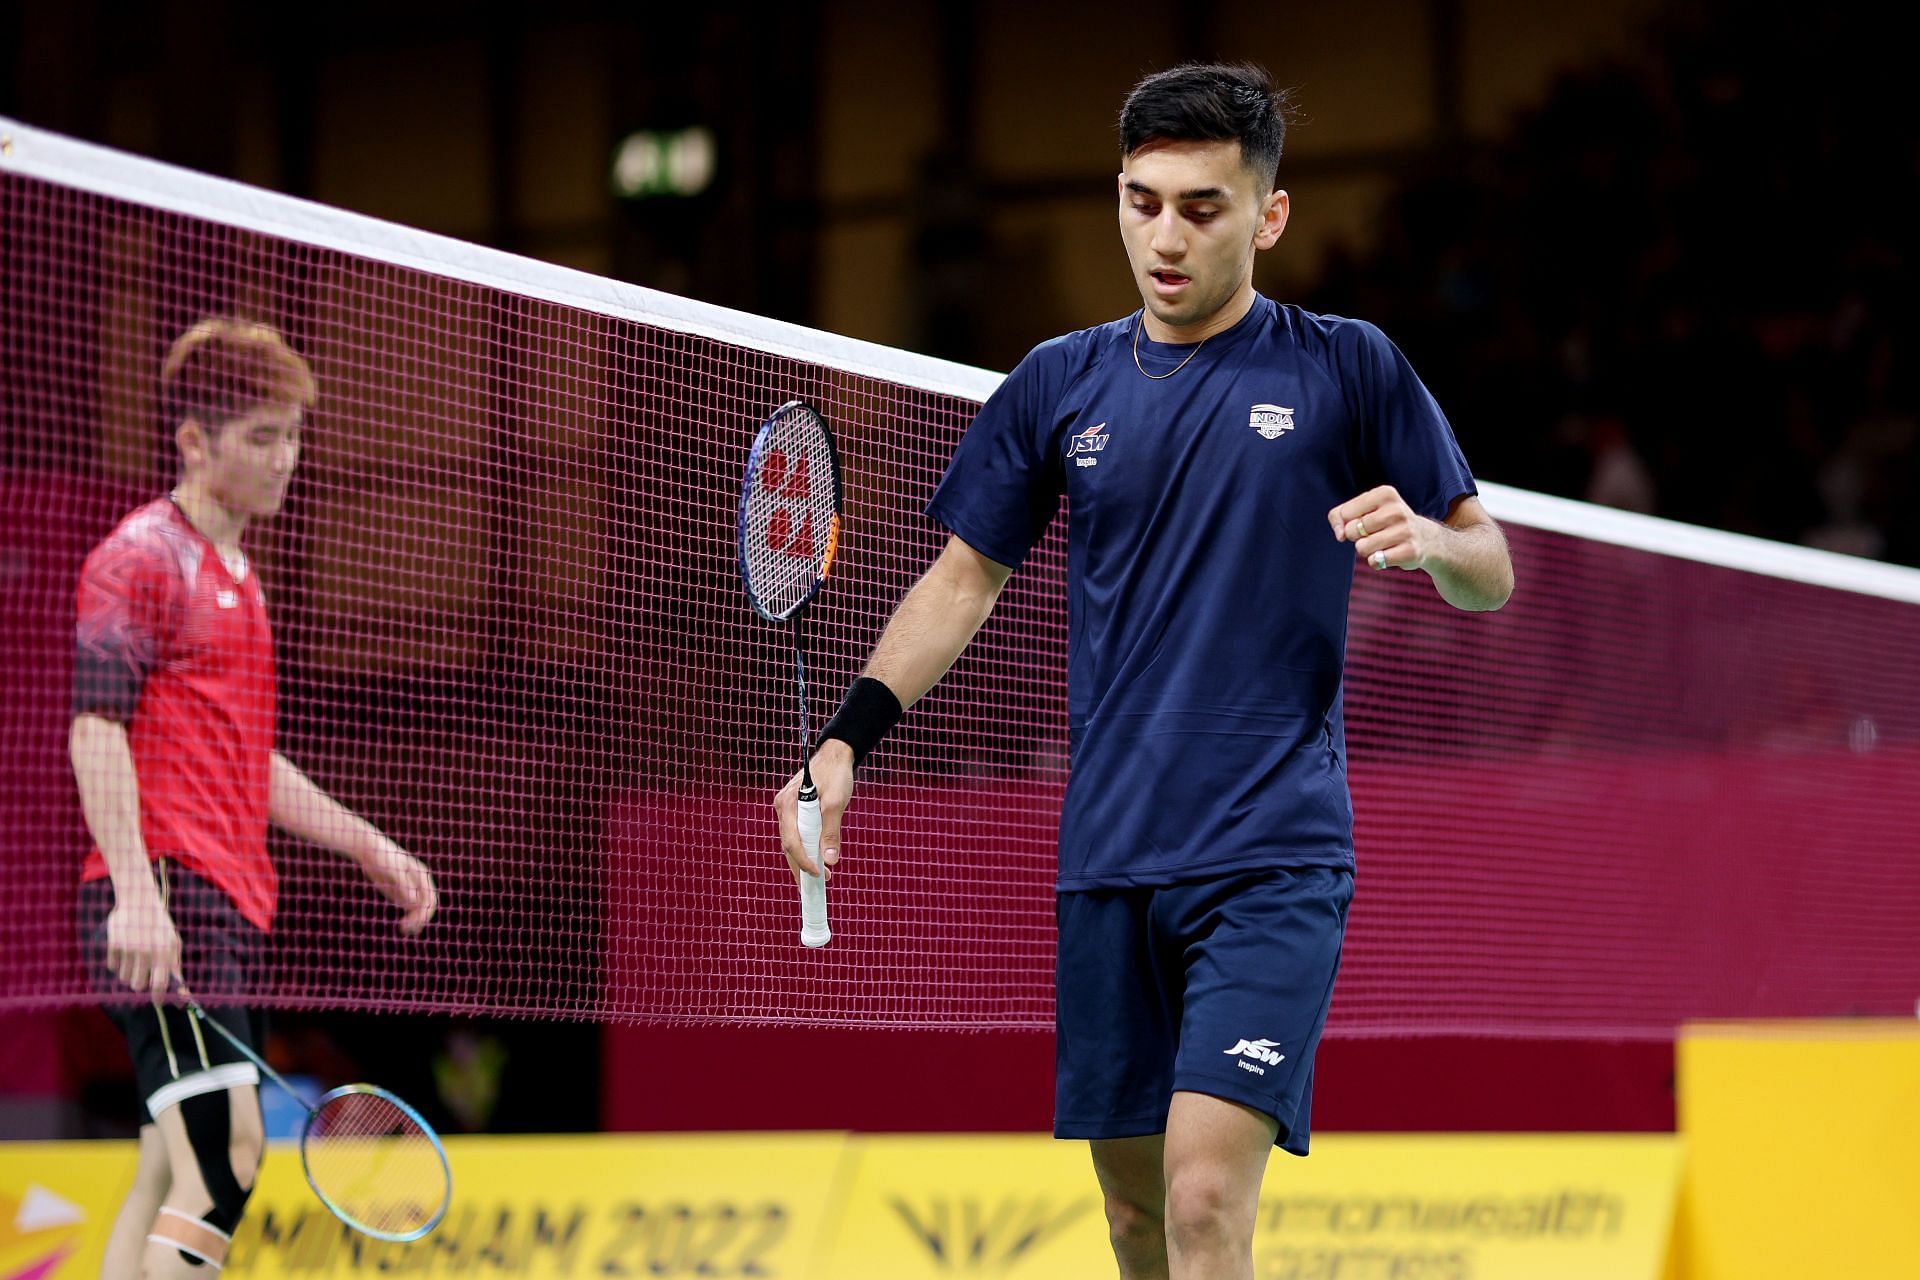 Lakshya Sen during his semi-final match at the 2022 Commonwealth Games (Image courtesy: Getty)